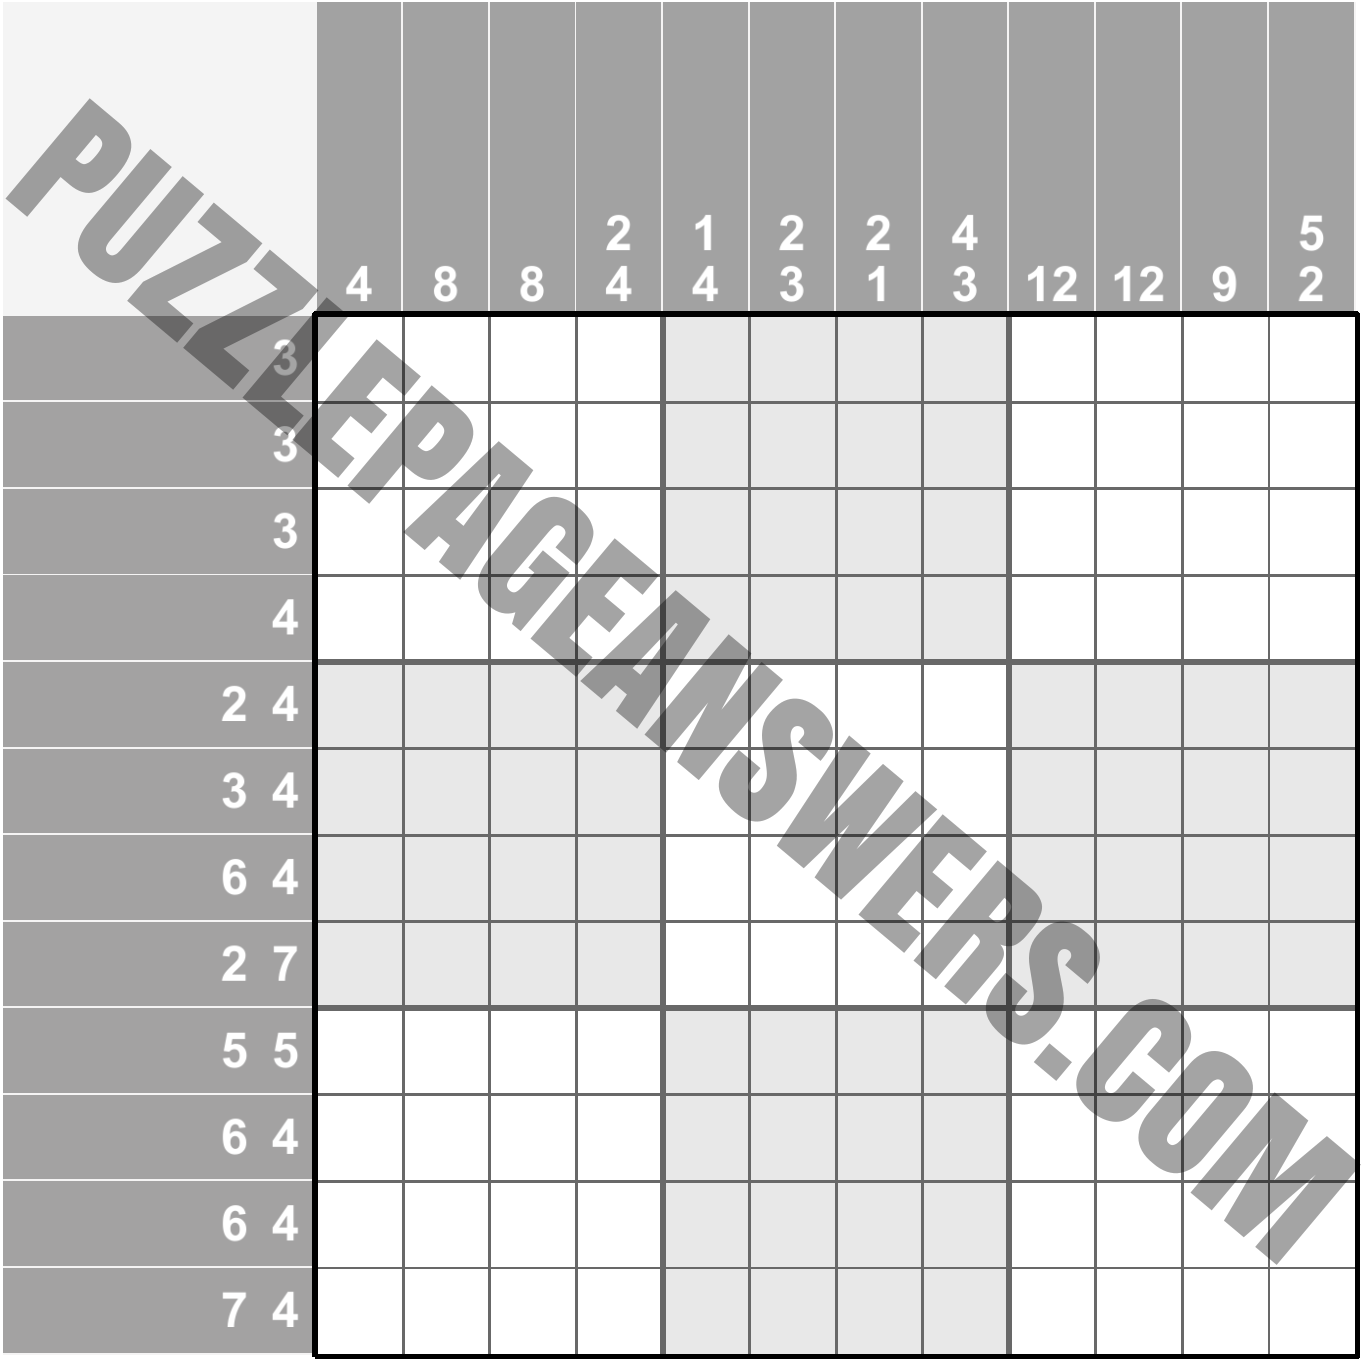 Puzzle Page Picture Cross August 14 2020 PuzzlePageAnswers com